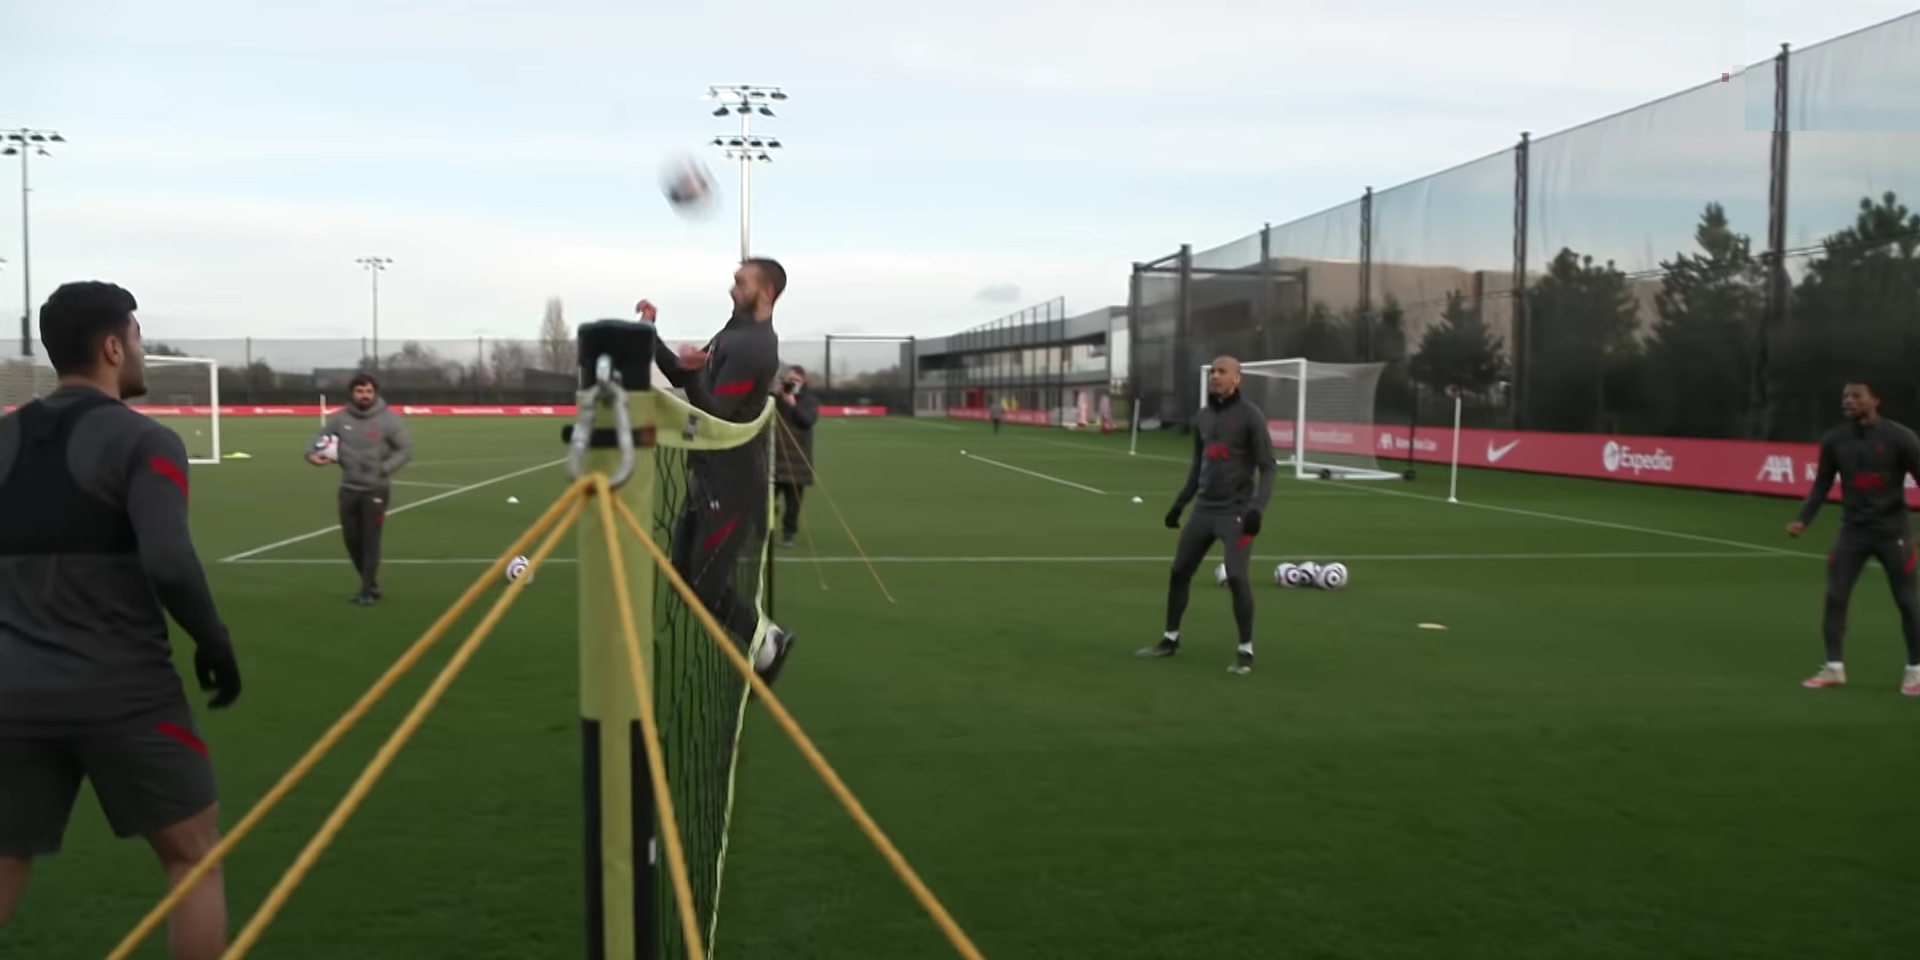 (Video) Phillips heads Thiago mistake in training because of course he does